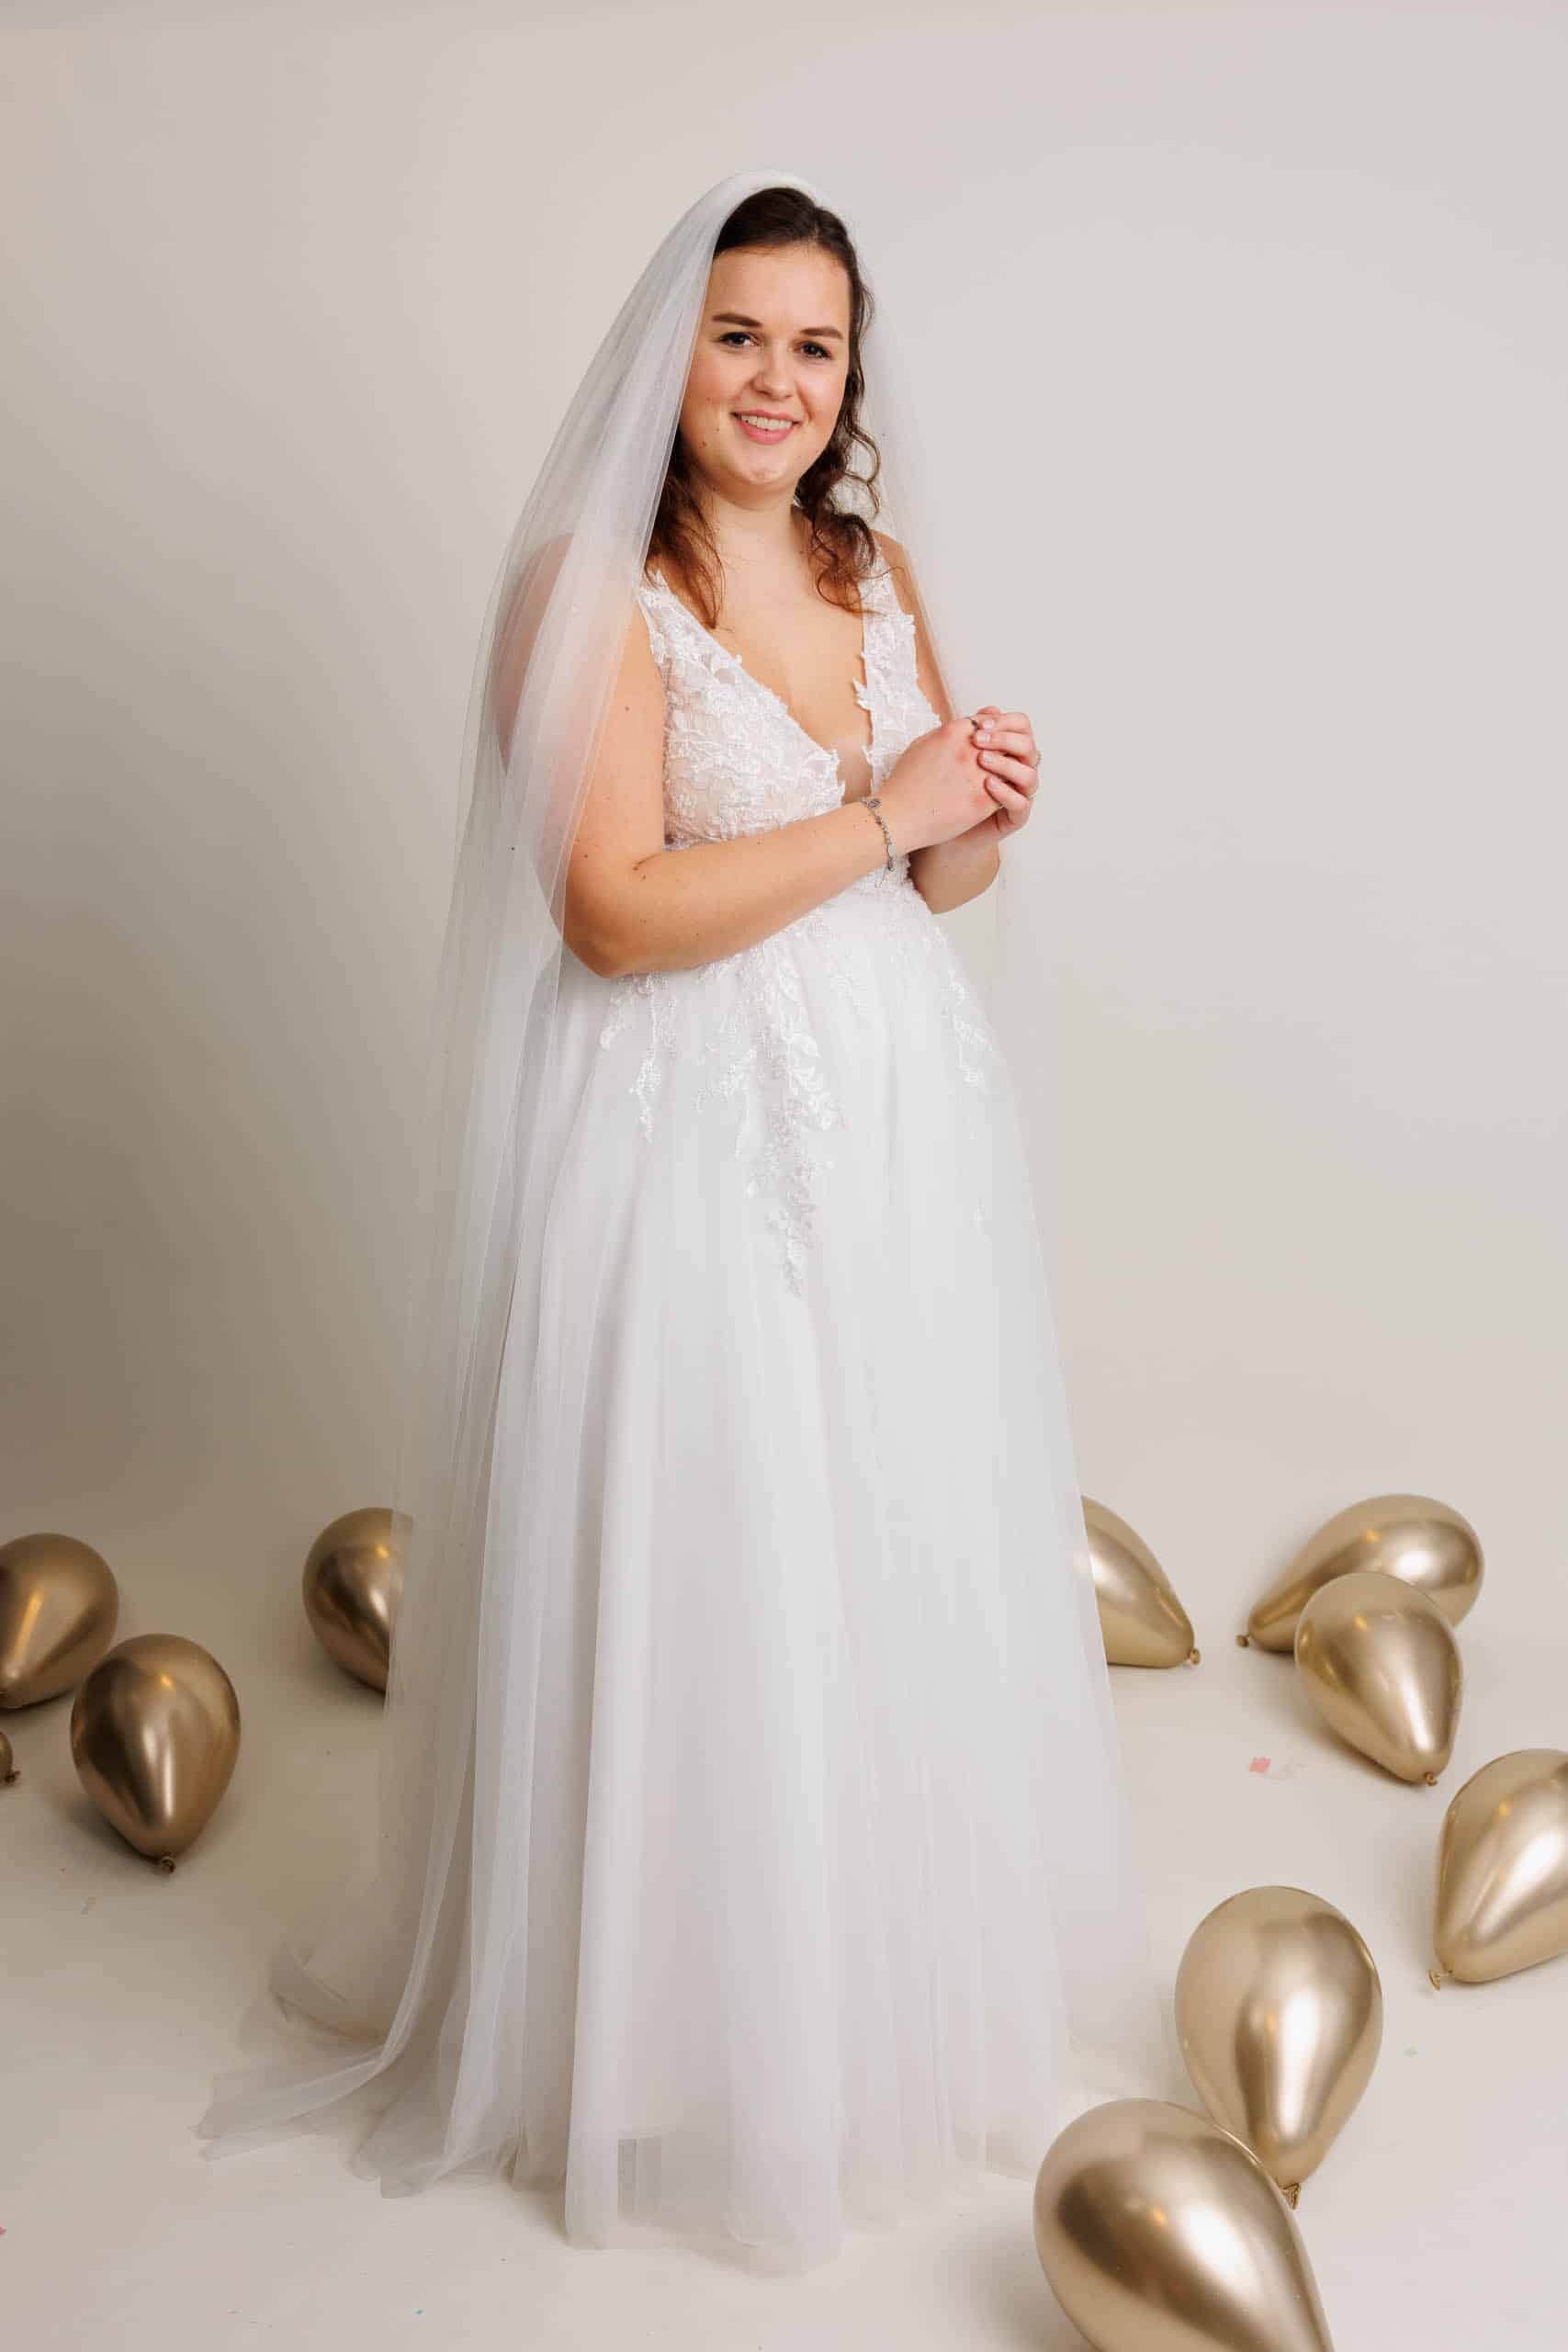 A woman in a wedding dress poses in front of balloons while trying on wedding dresses for fun.